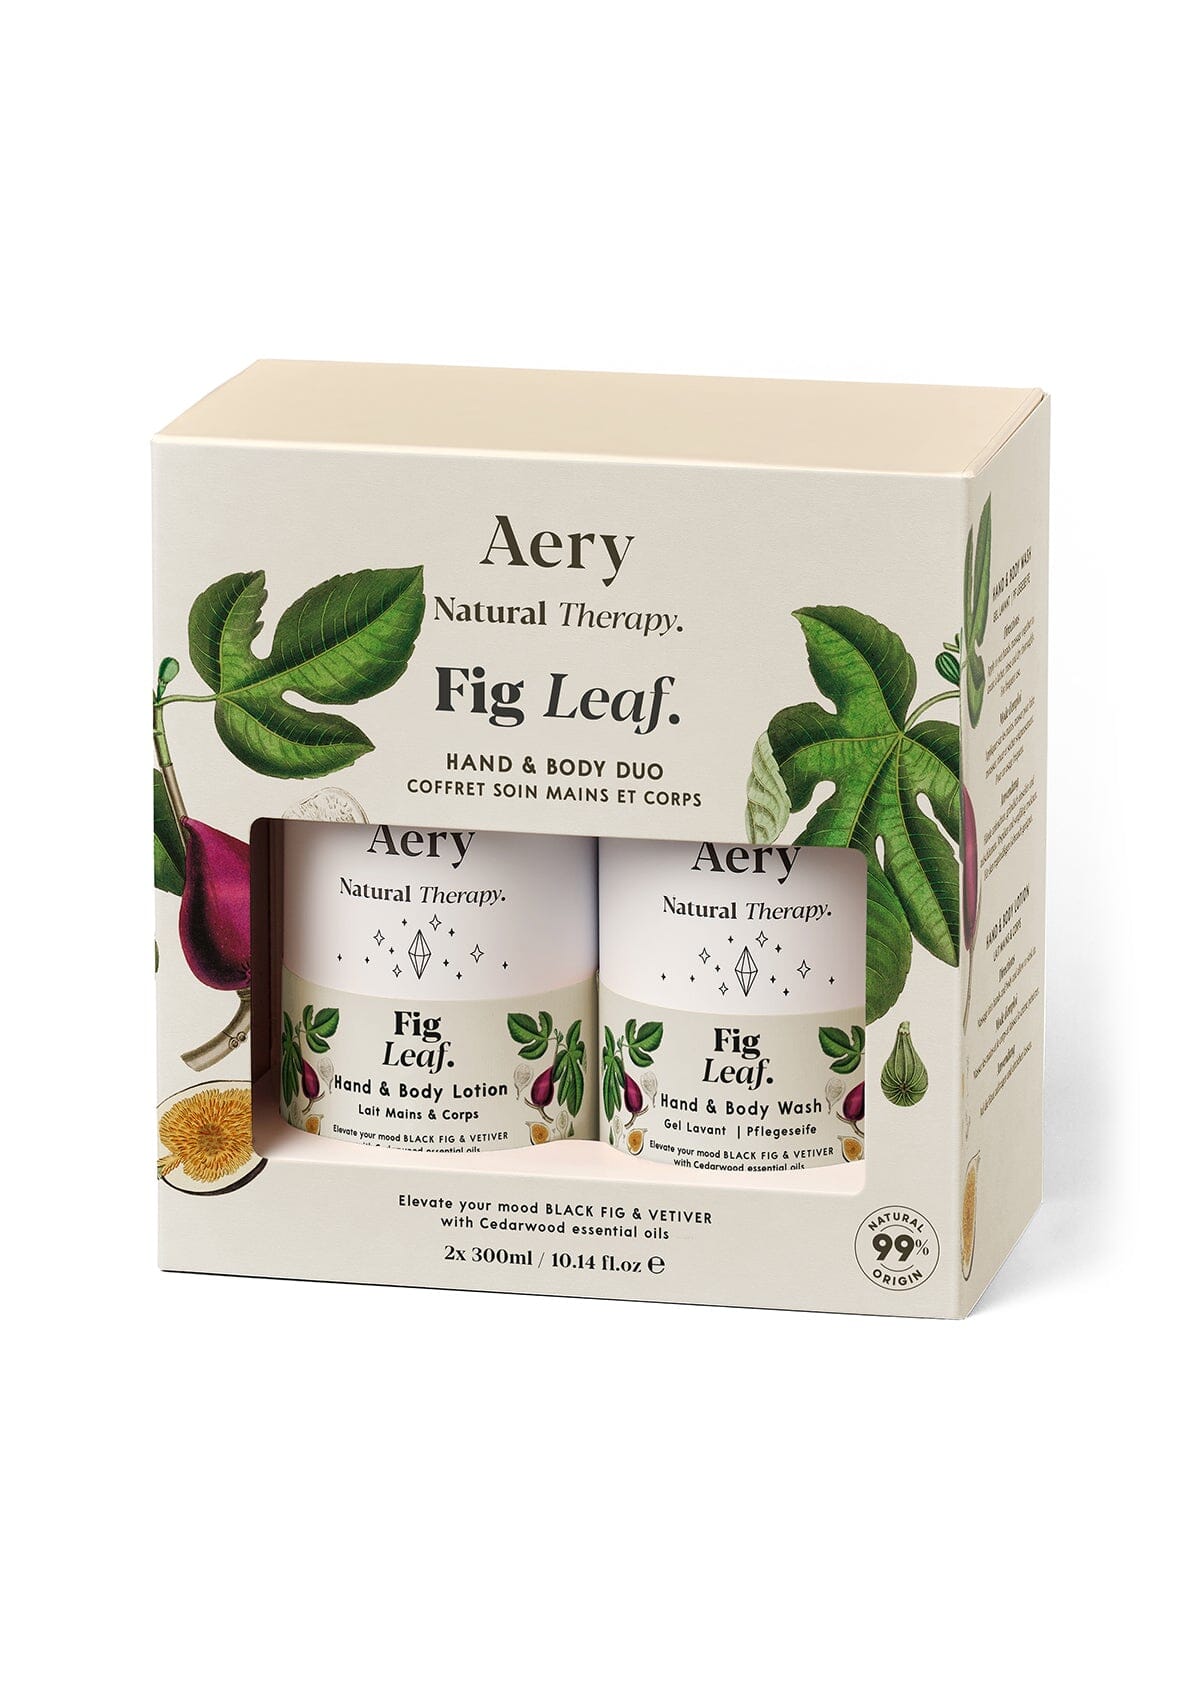 Cream Fig Leaf  Hand and body duo displayed in product packaging by Aery on white background